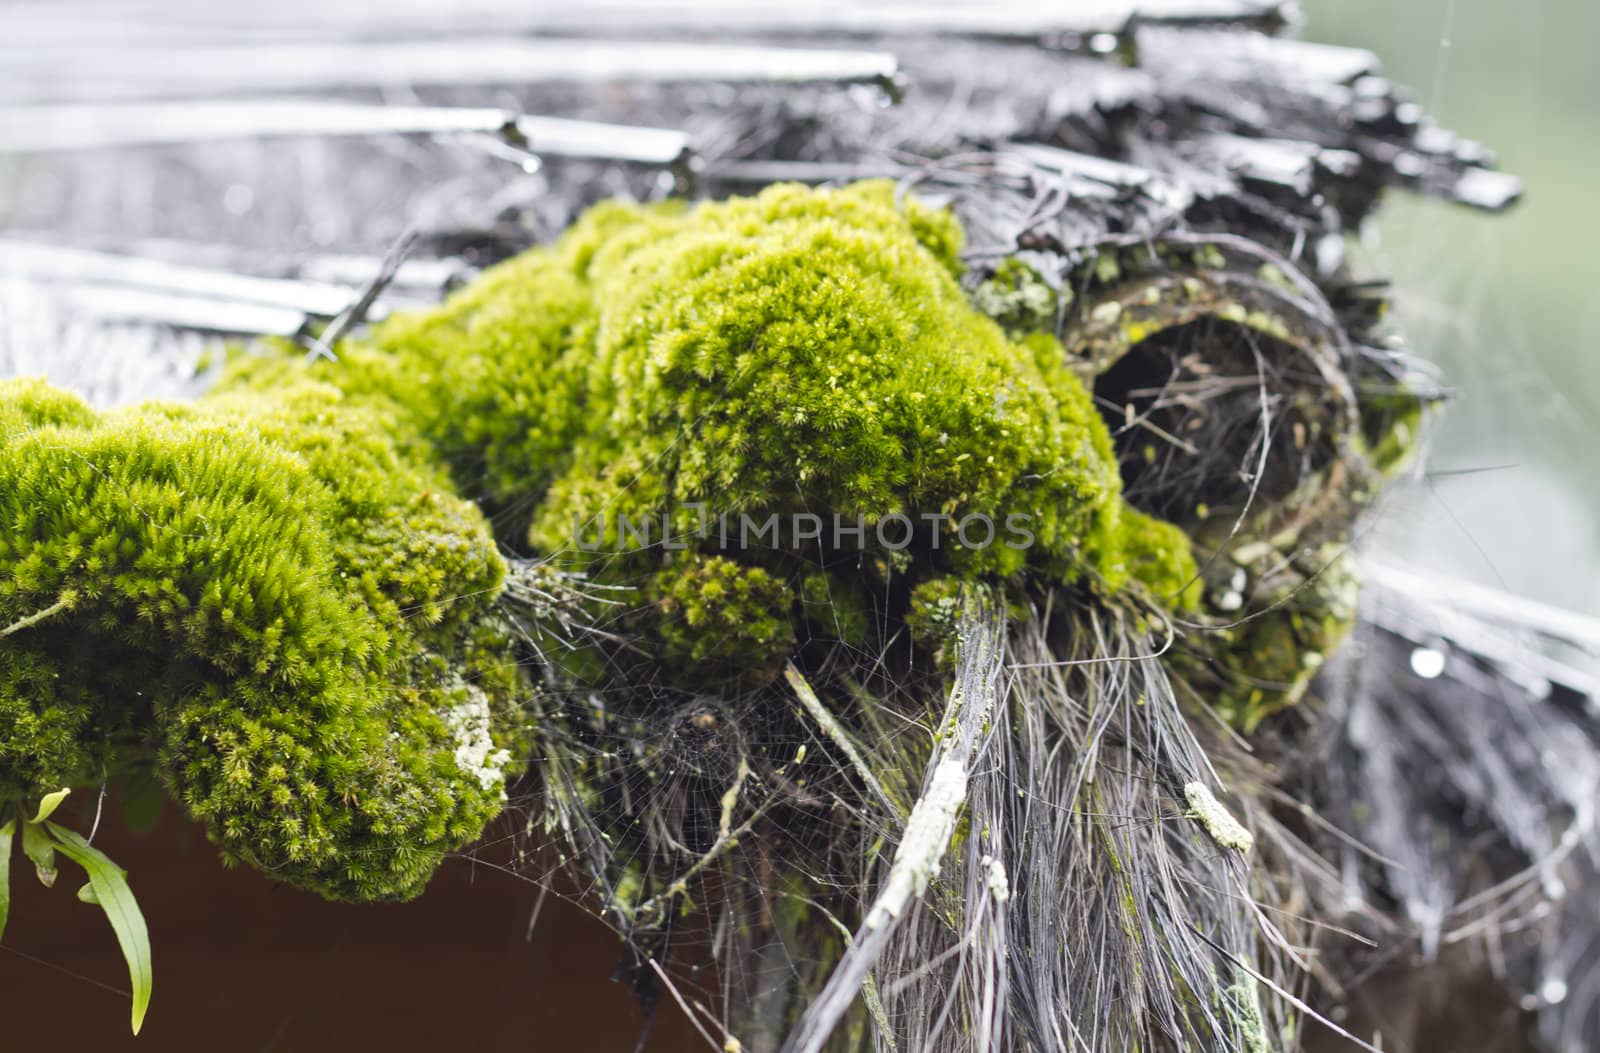 Moss and Straw Roof Close up by azamshah72